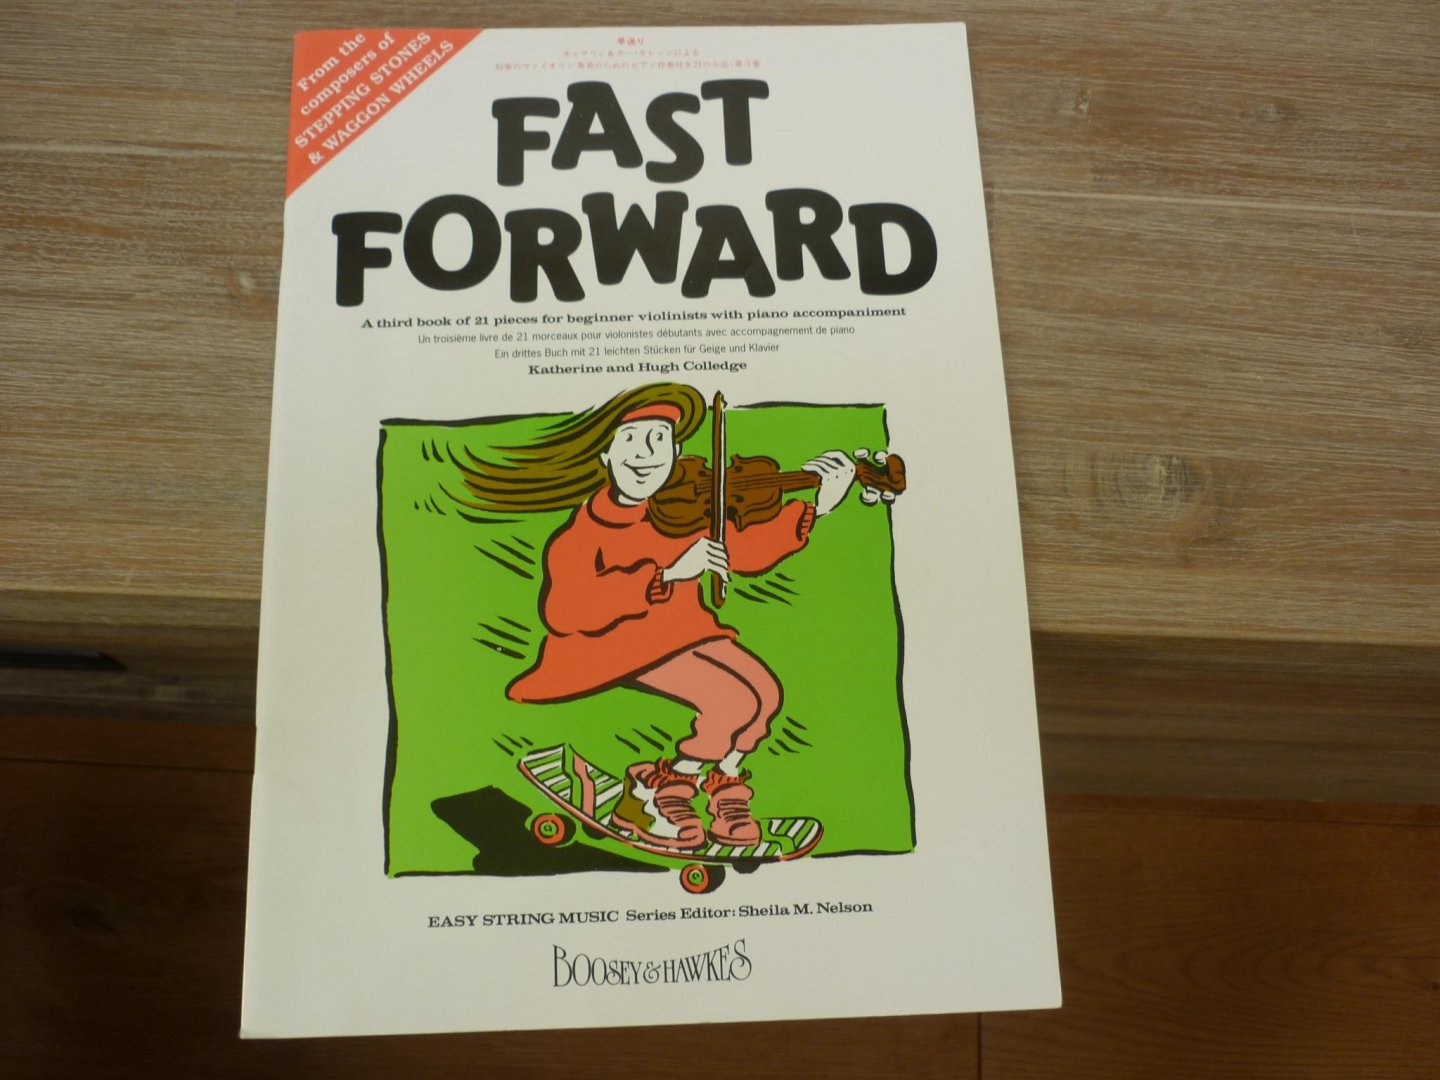 Colledge; Katherine and Hugh - FAST FORWARD; A third book of 21 pieces for beginning violinists with piano accompaniment. Voor viool en piano; Geen solo-partij